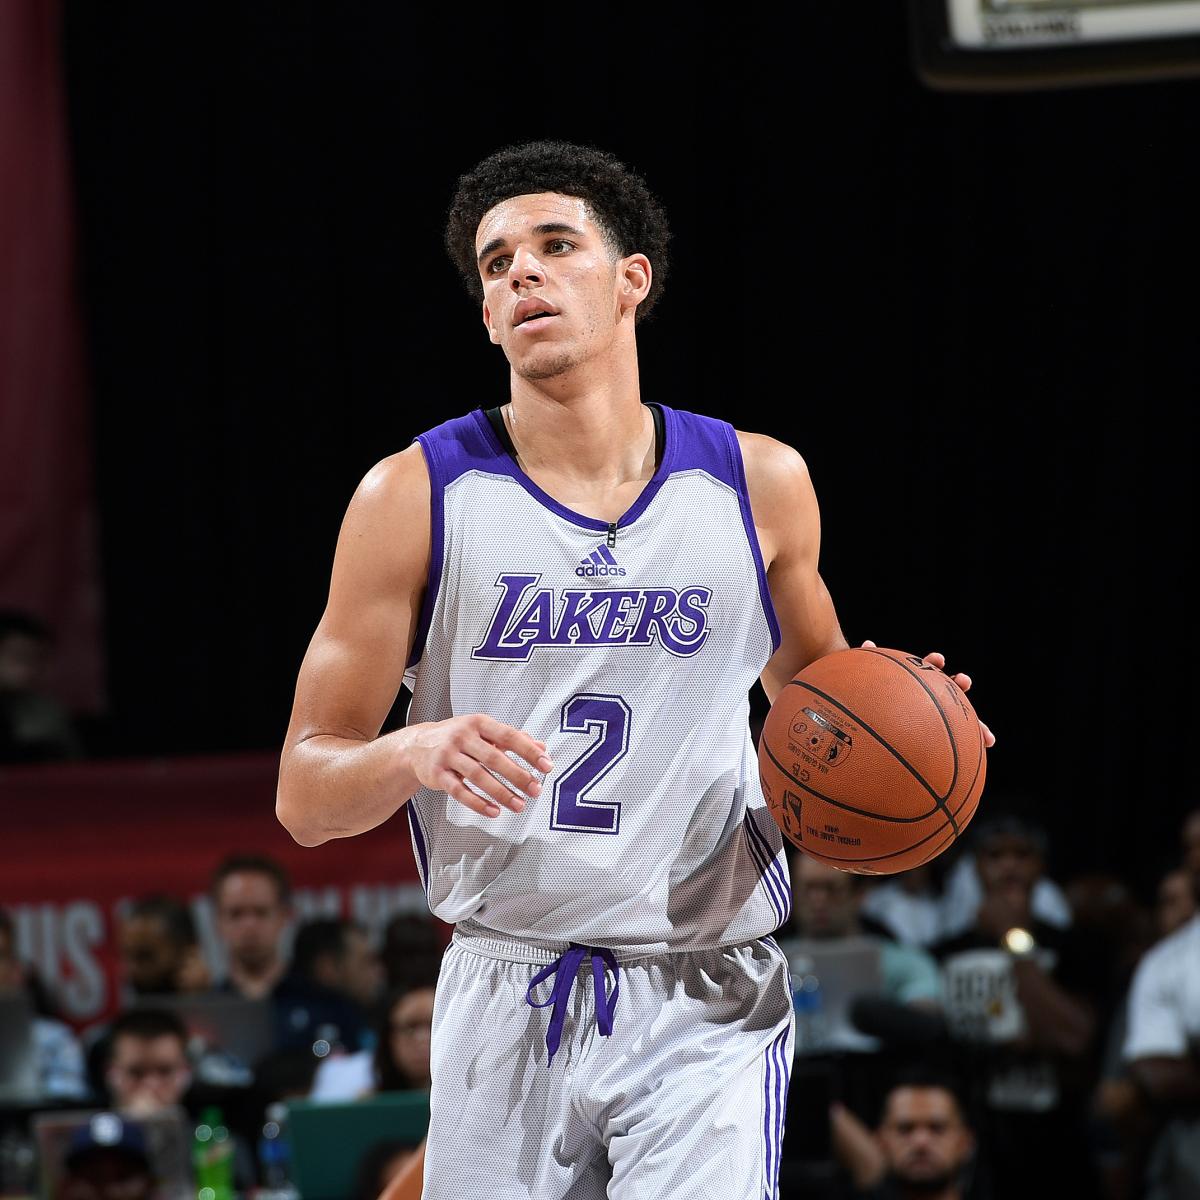 Reacting to 'the best Lonzo Ball news' since his injury two years